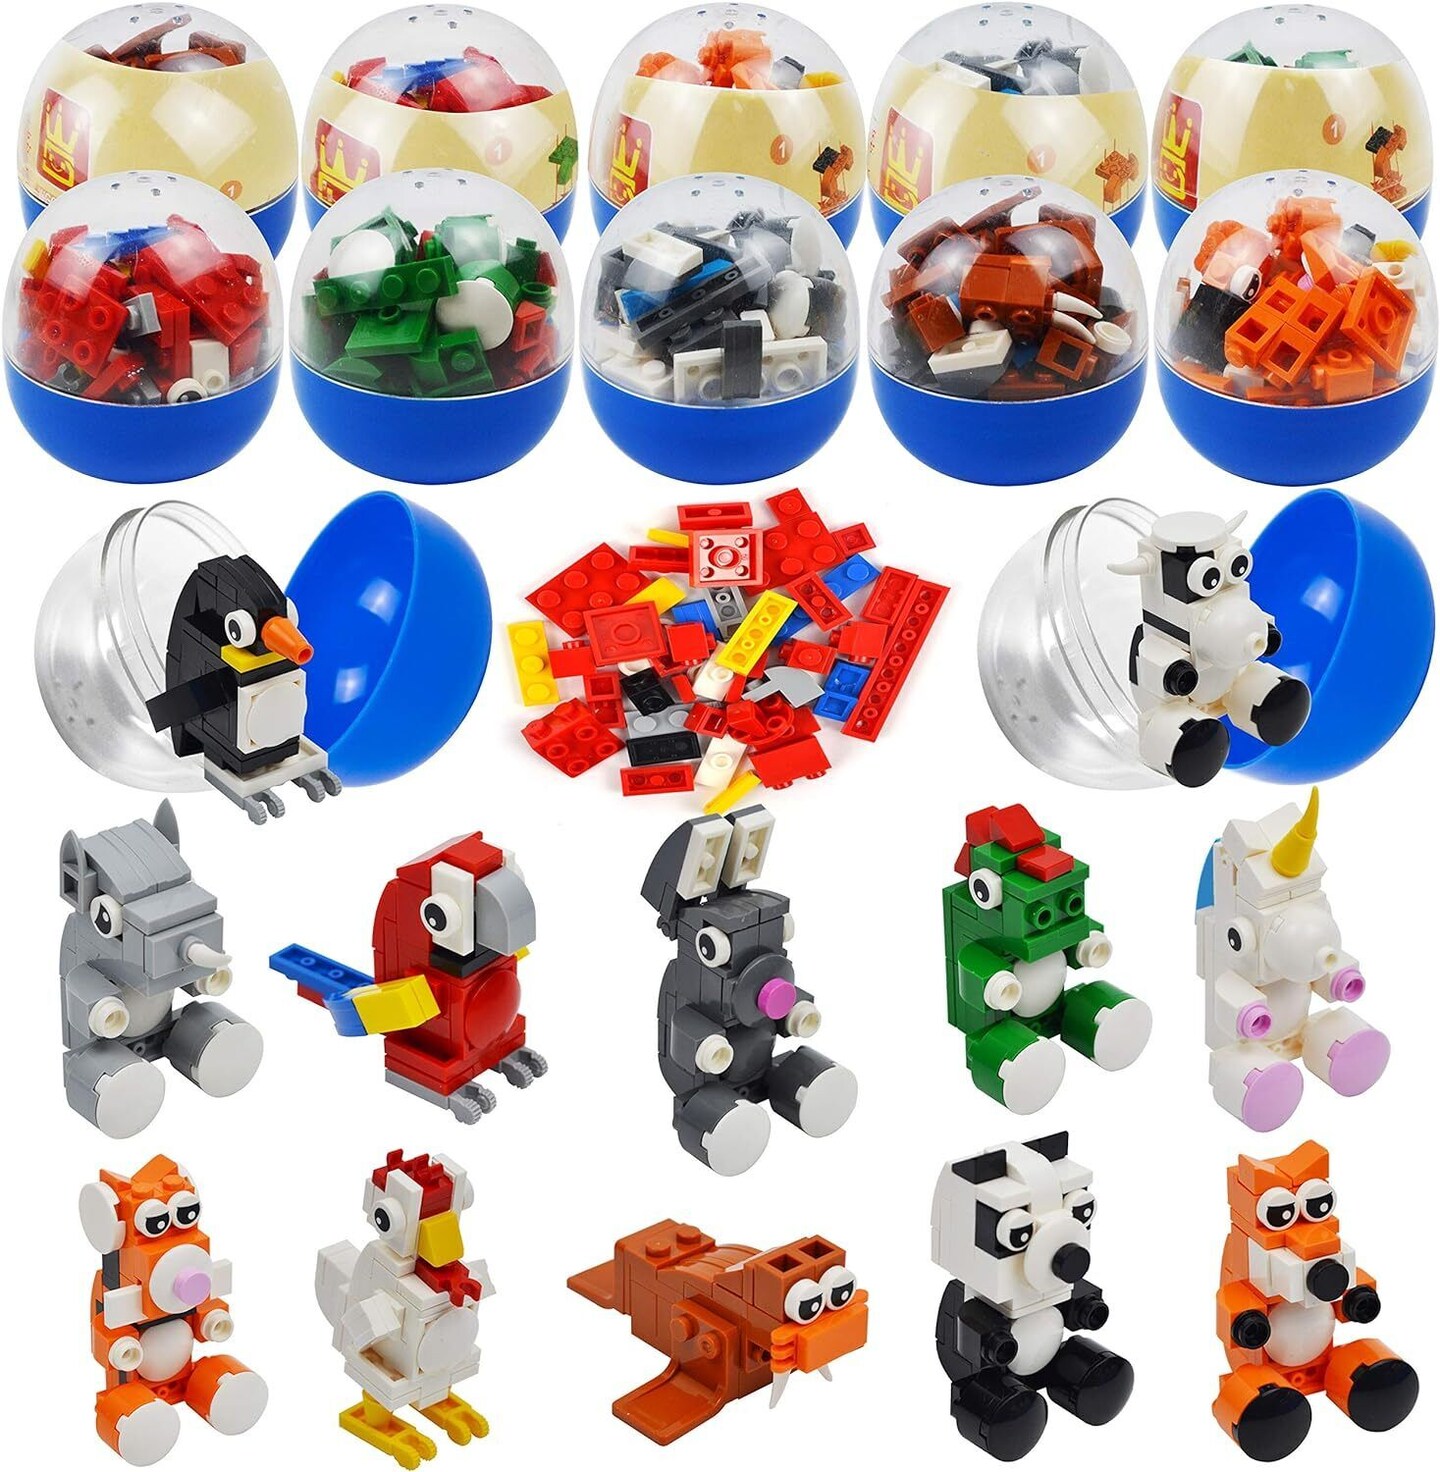 Filmy Easter Eggs with Animal Building Blocks 12 pcs